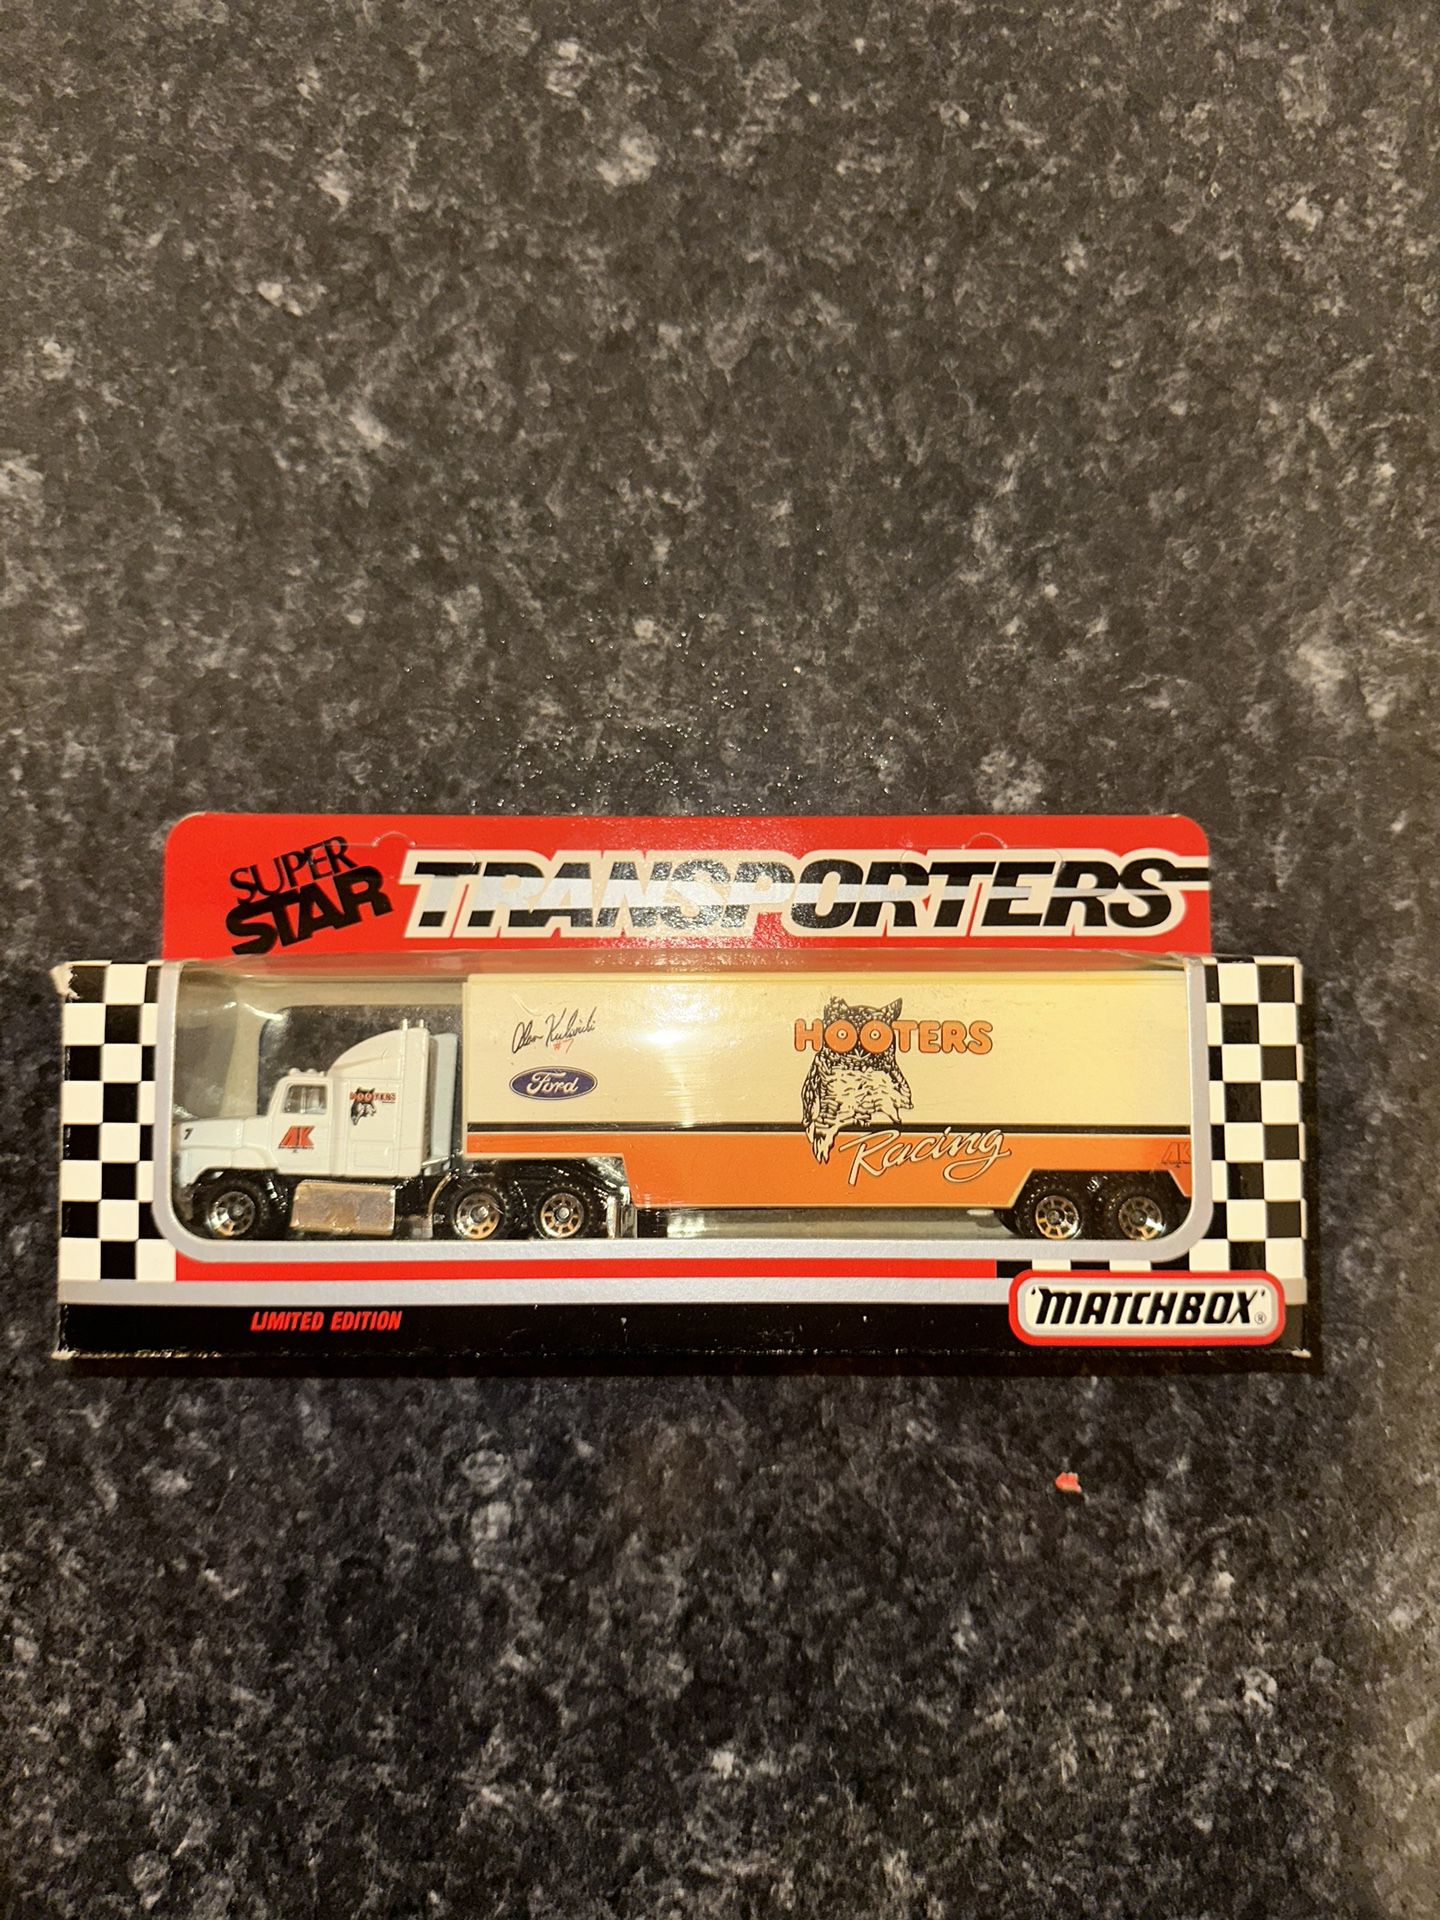 super star transporters matchbox hooters racing toy hauler Limited edition 